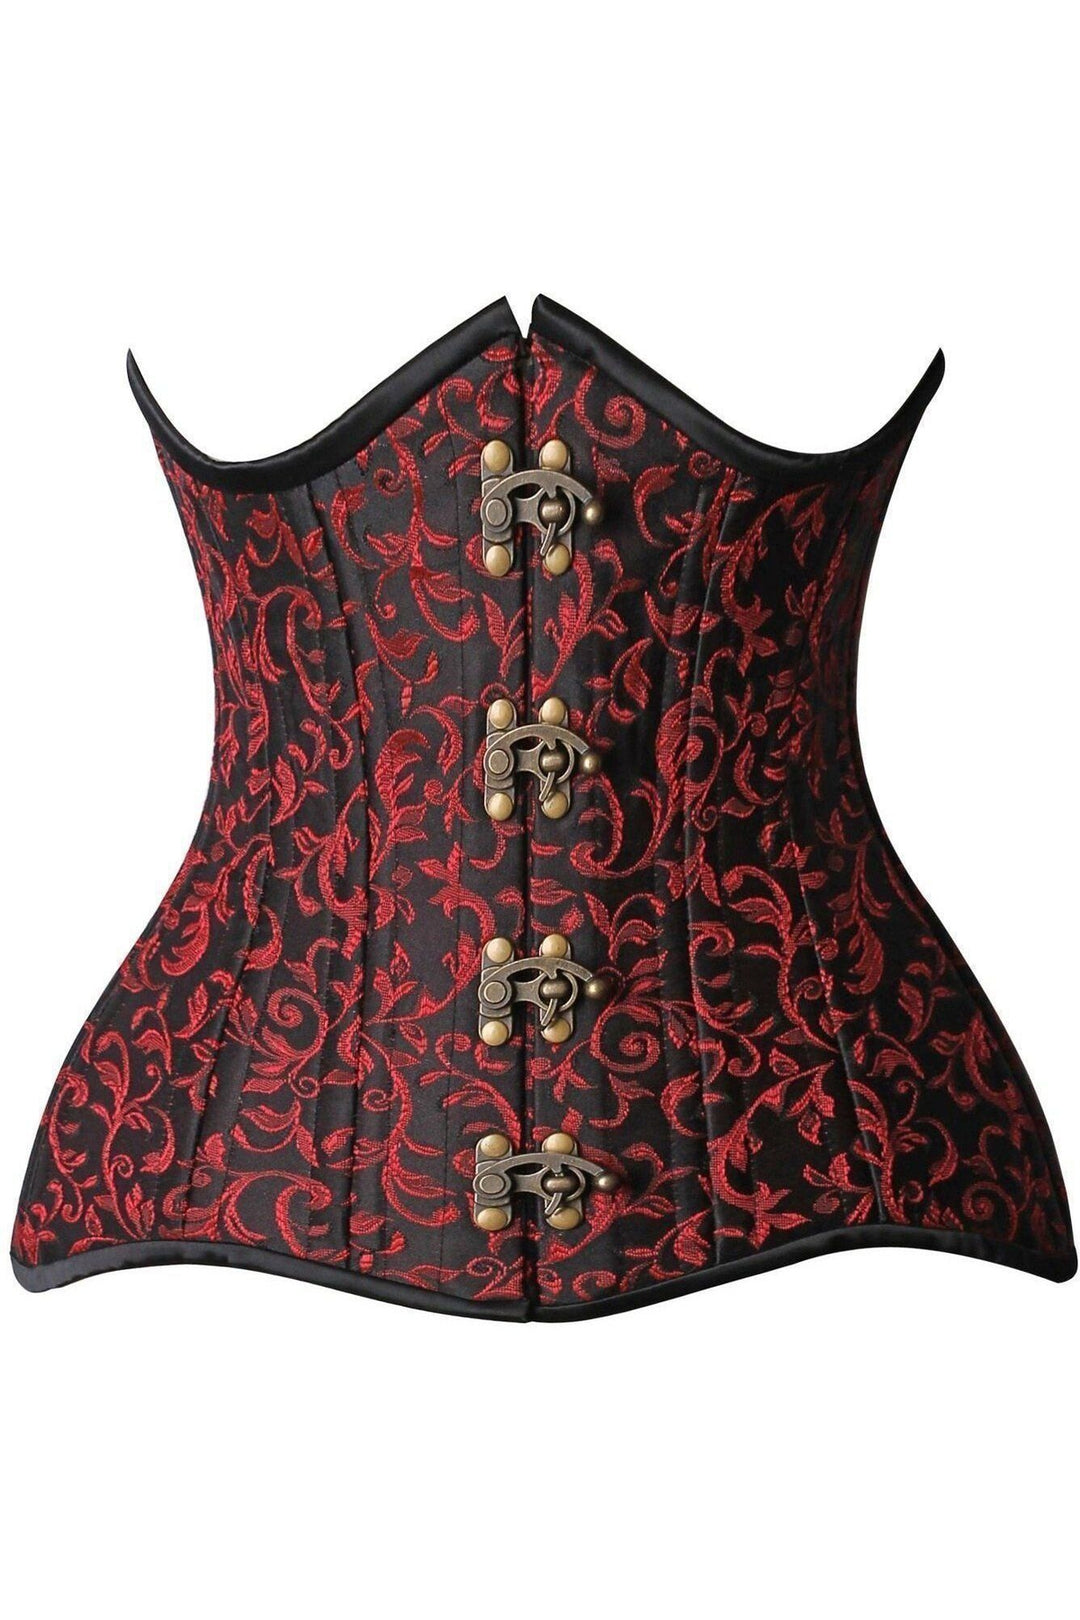 Top Drawer CURVY Brocade Double Steel Boned Under Bust Corset-Daisy Premium-SEXYSHOES.COM